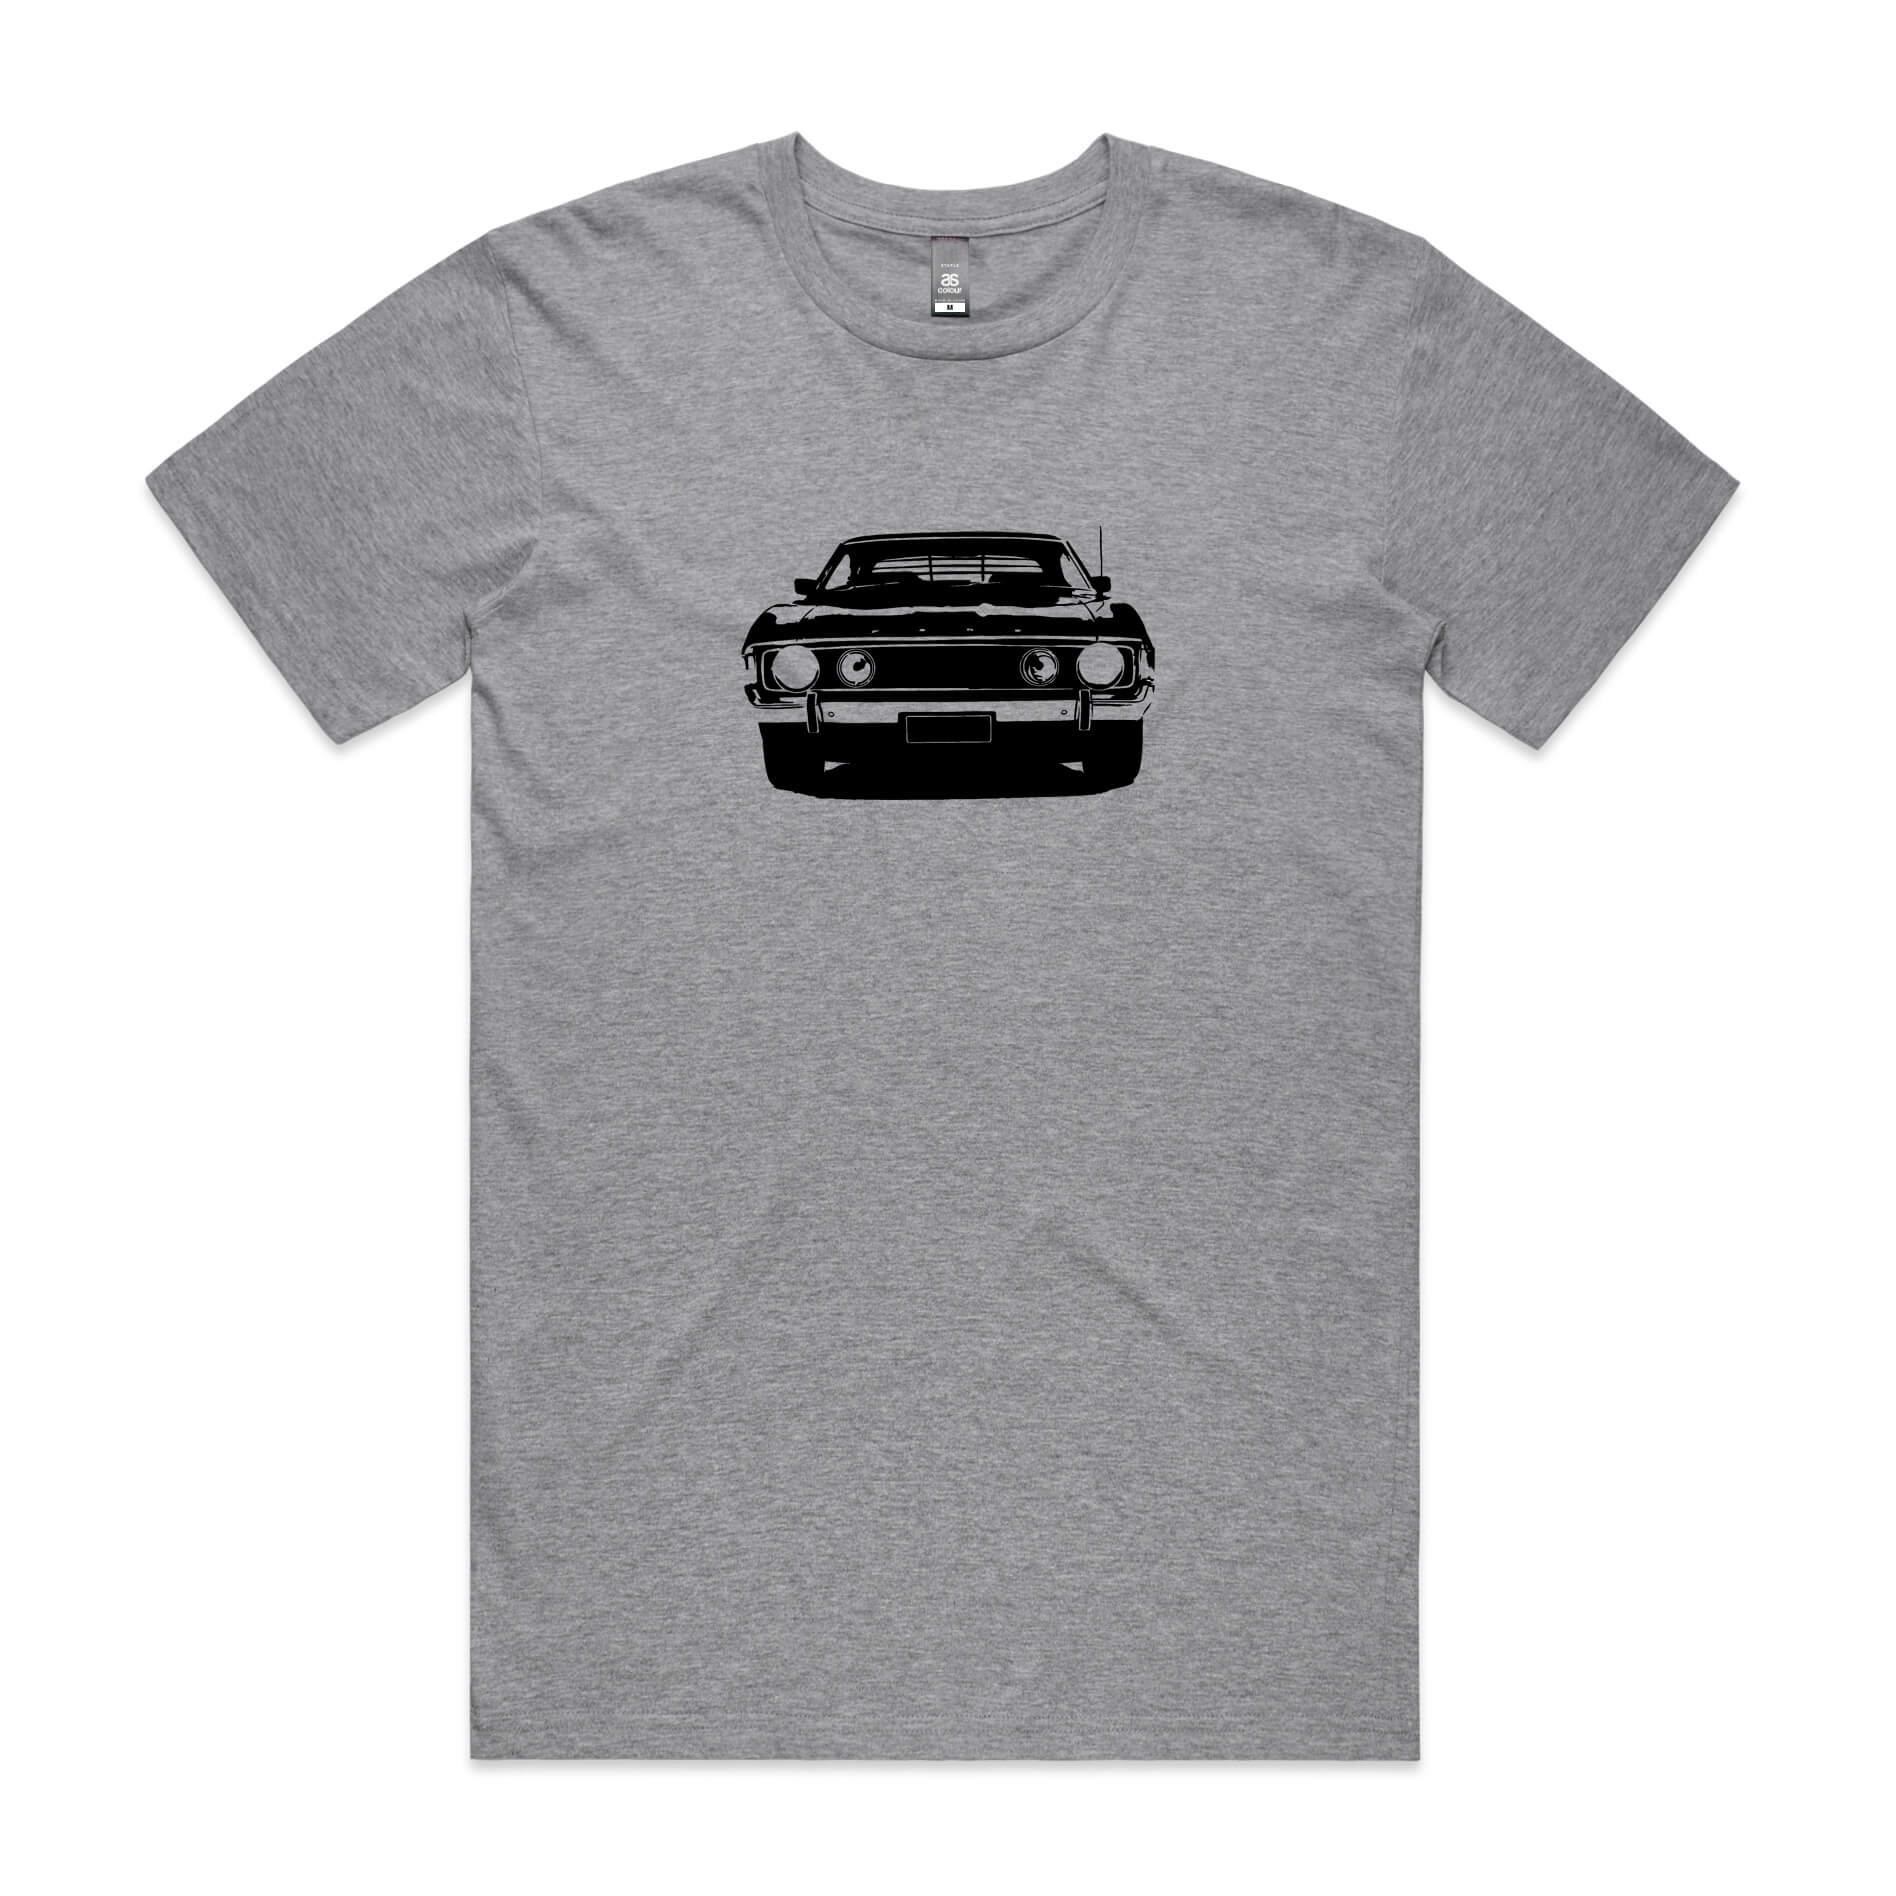 Ford XA Falcon t-shirt in grey with a black car silhouette graphic